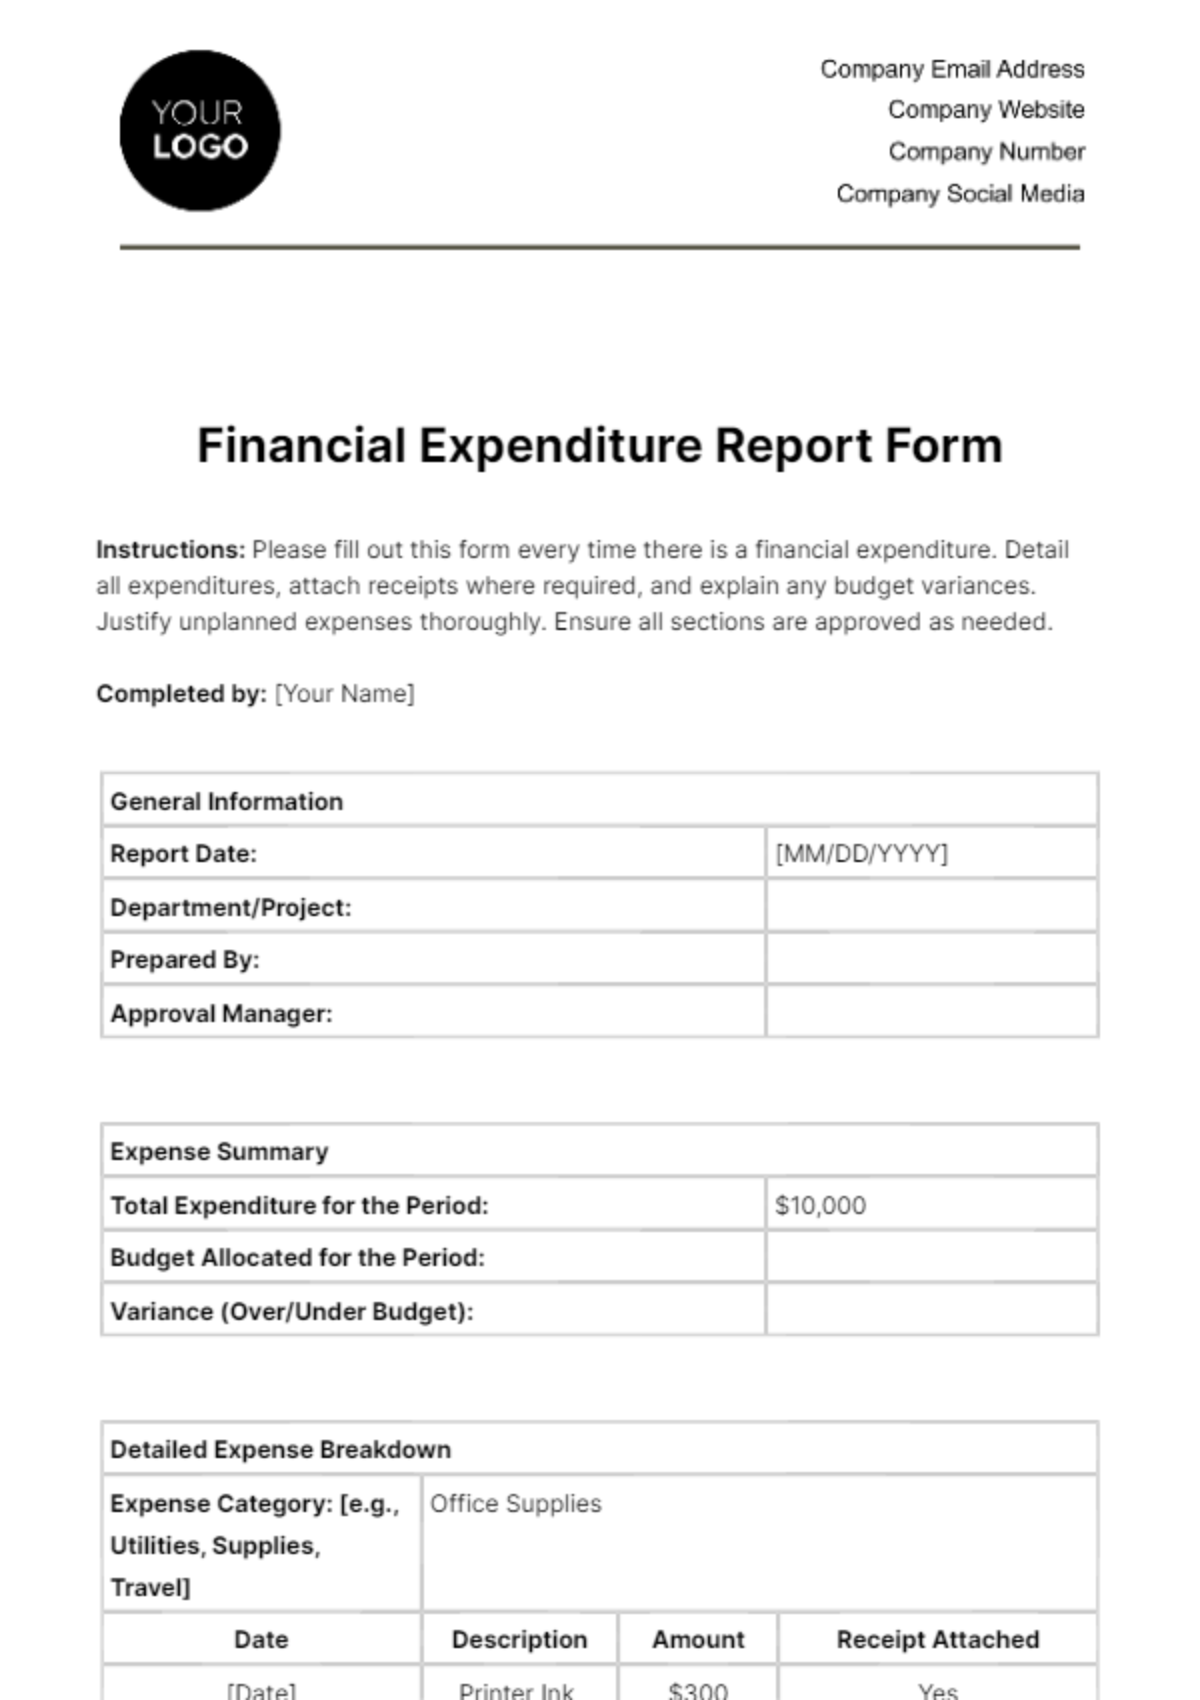 Financial Expenditure Report Form Template